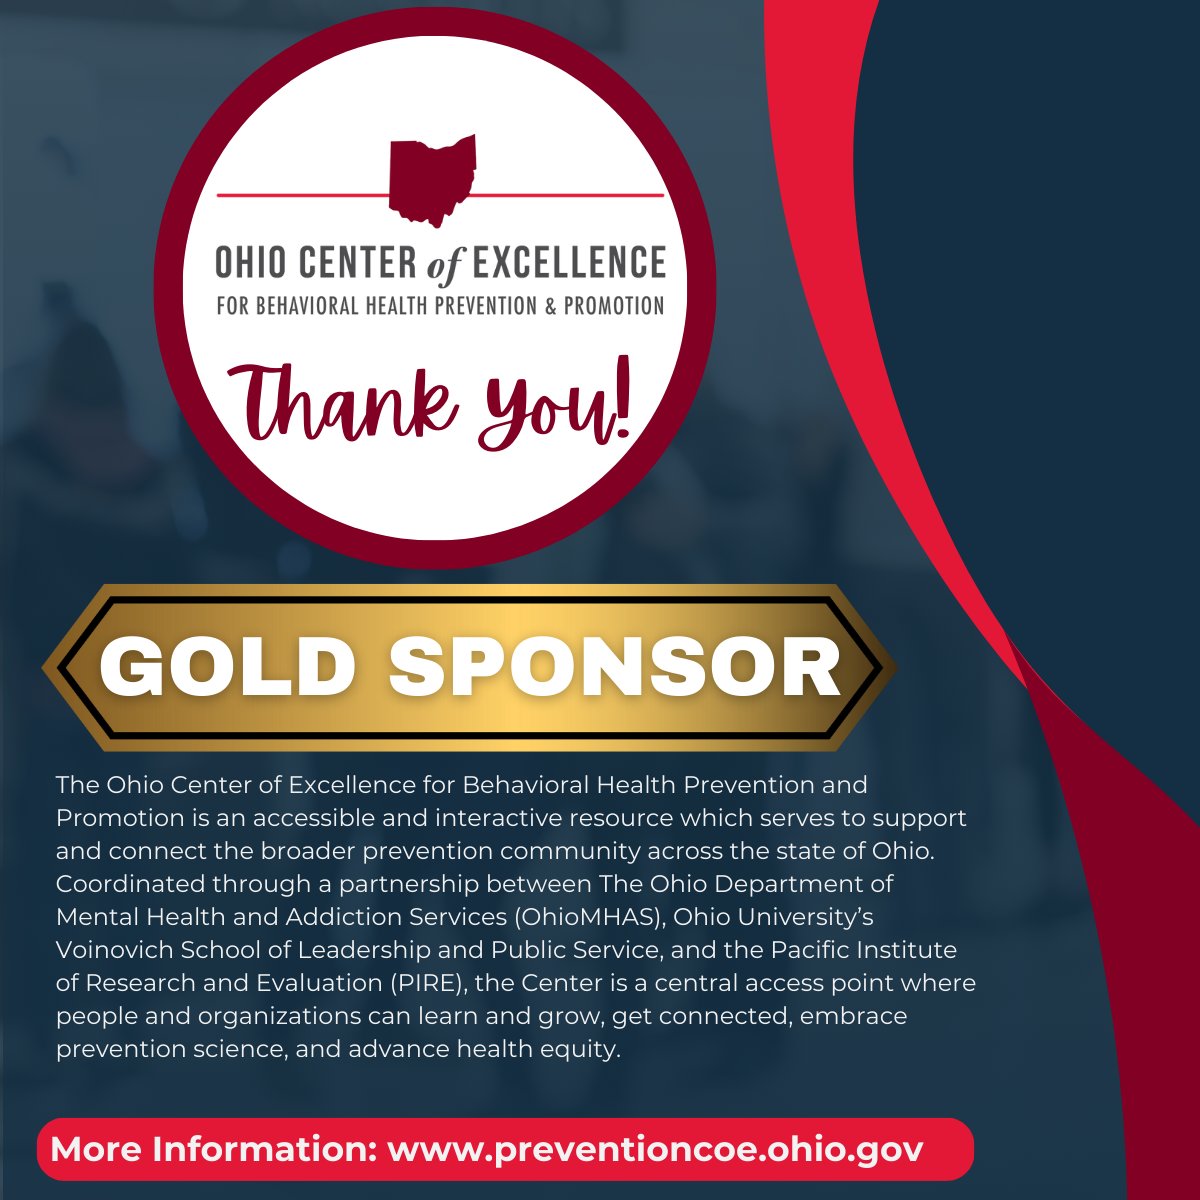 Many thanks to the Ohio Center of Excellence for Behavioral Health Prevention and Promotion for being a gold sponsor at our upcoming Annual Conference. To learn more about the Ohio Center of Excellence, visit: preventioncoe.ohio.gov